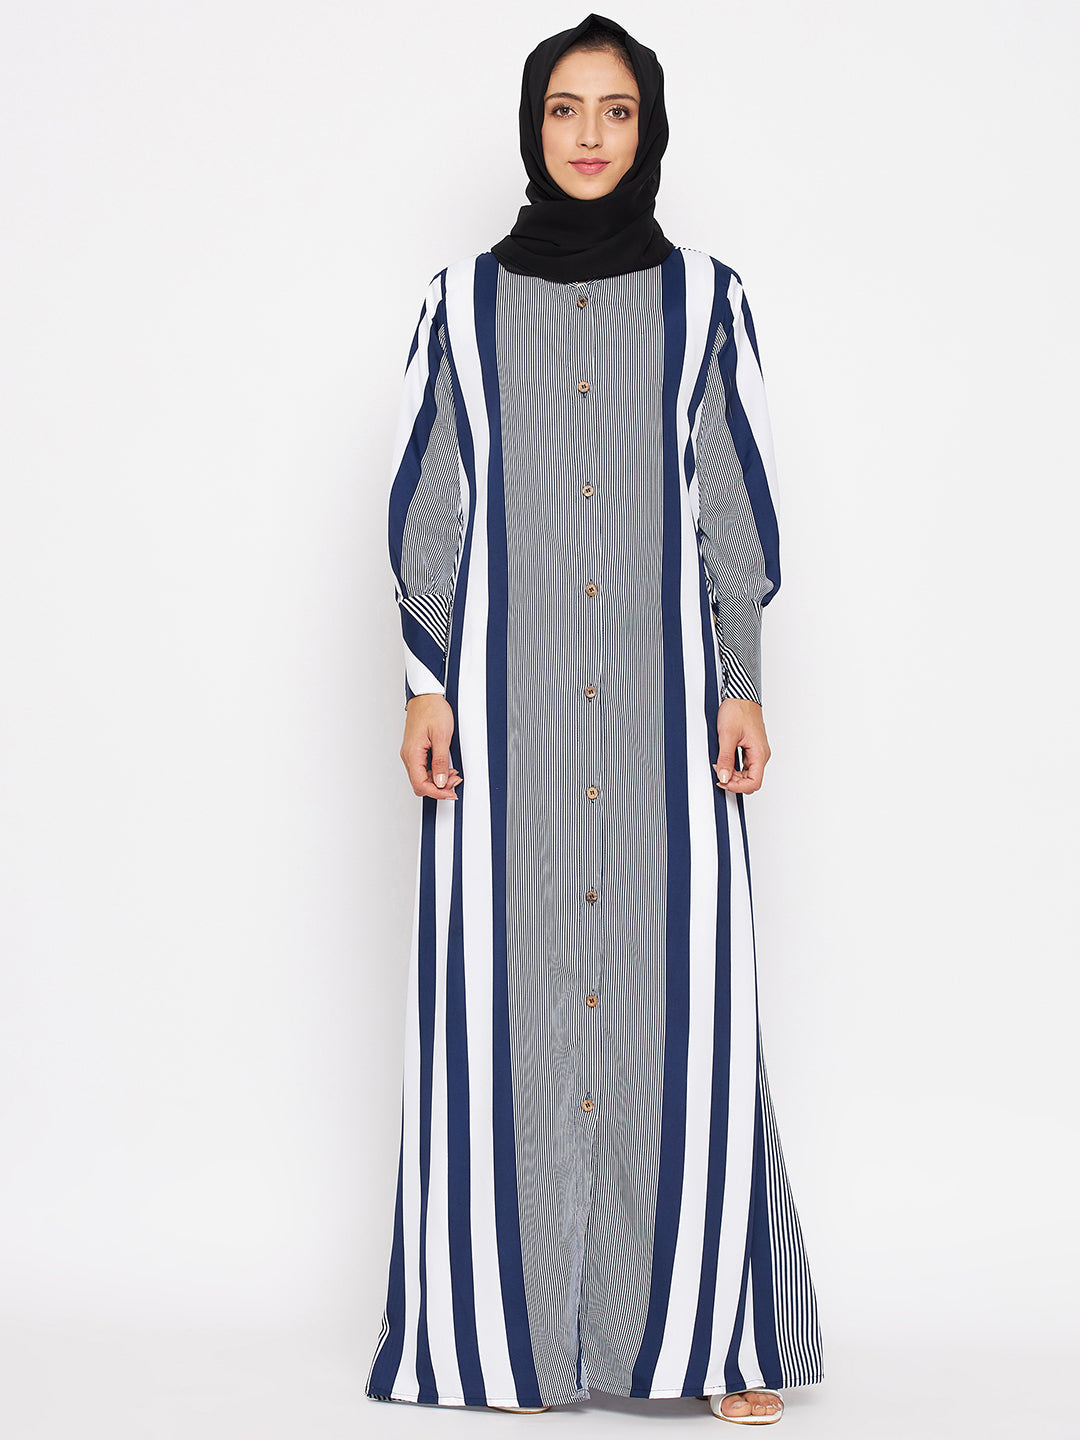 Blue Stripe Front Open Abaya for Women with Black Georgette Scarf